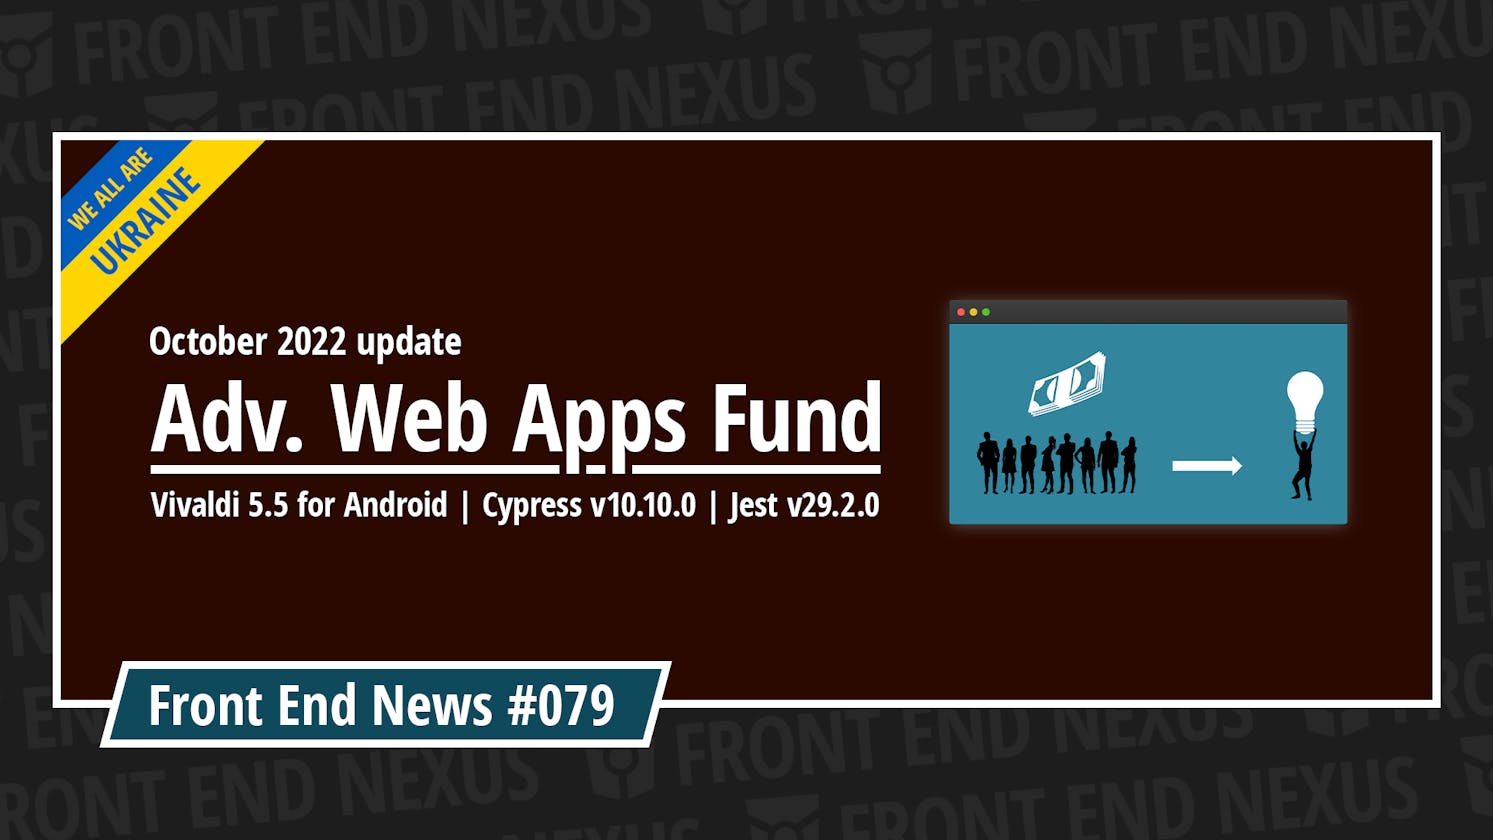 Adv. Web Apps Fund October 2022 update, Vivaldi 5.5 for Android, Cypress v10.10.0, Jest v29.2.0, and more | Front End News #079